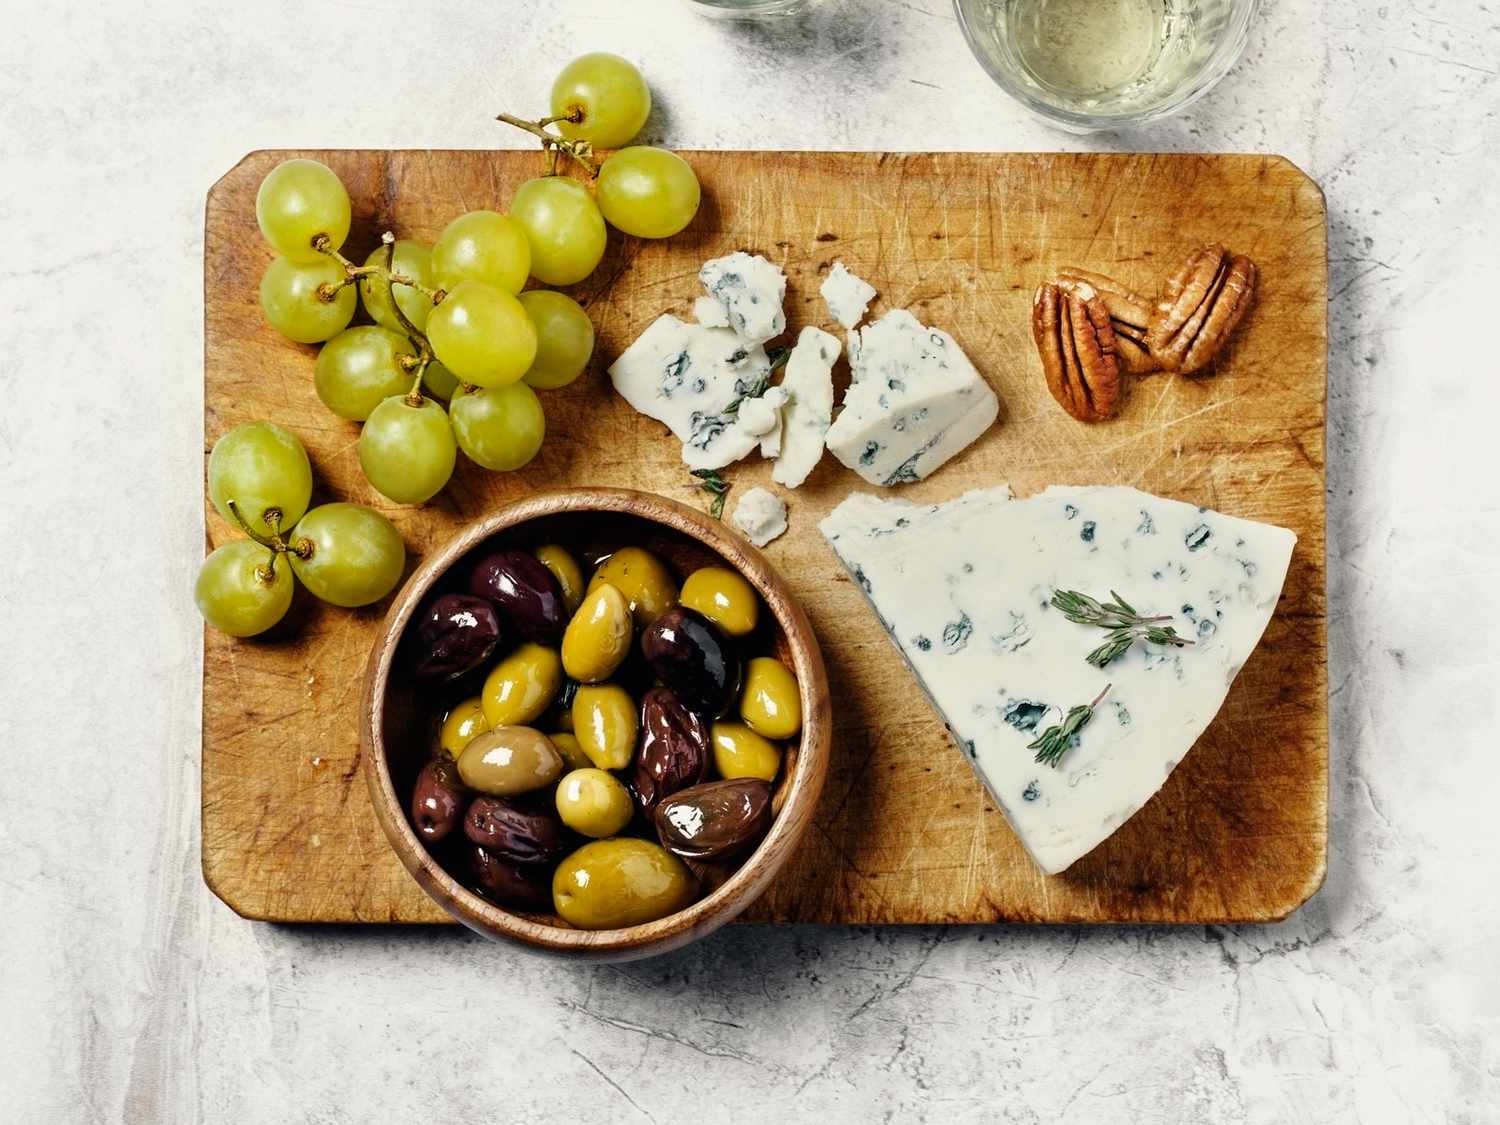 etiquette-how-to-eat-unpitted-olives